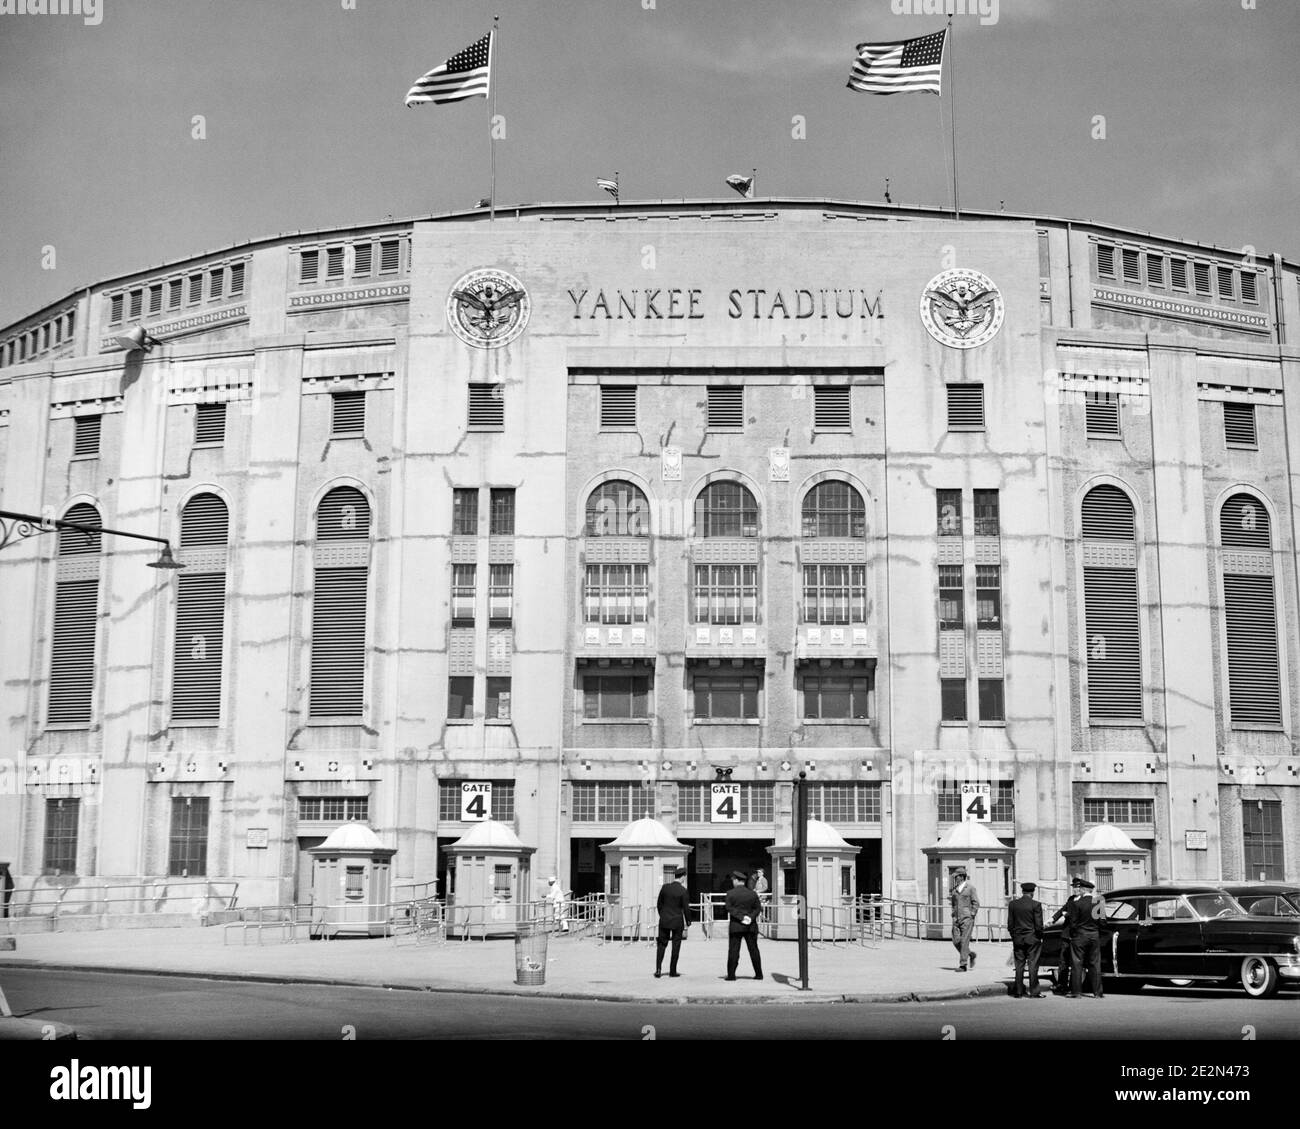 1950s ORIGINAL 1923 YANKEE STADIUM BASEBALL PARK ENTRANCE TO GATE #4 LOCATED IN THE BOROUGH OF THE BRONX NEW YORK CITY NY USA - q50129 CPC001 HARS CITIES LOCATED NEW YORK CITY YANKEE BALL GAME BALL SPORT BOROUGH FACADE LIMESTONE YANKEES BASEBALL BAT BLACK AND WHITE CONCOURSE GRANITE MAJOR LEAGUE MLB OLD FASHIONED YANKEE STADIUM Stock Photo